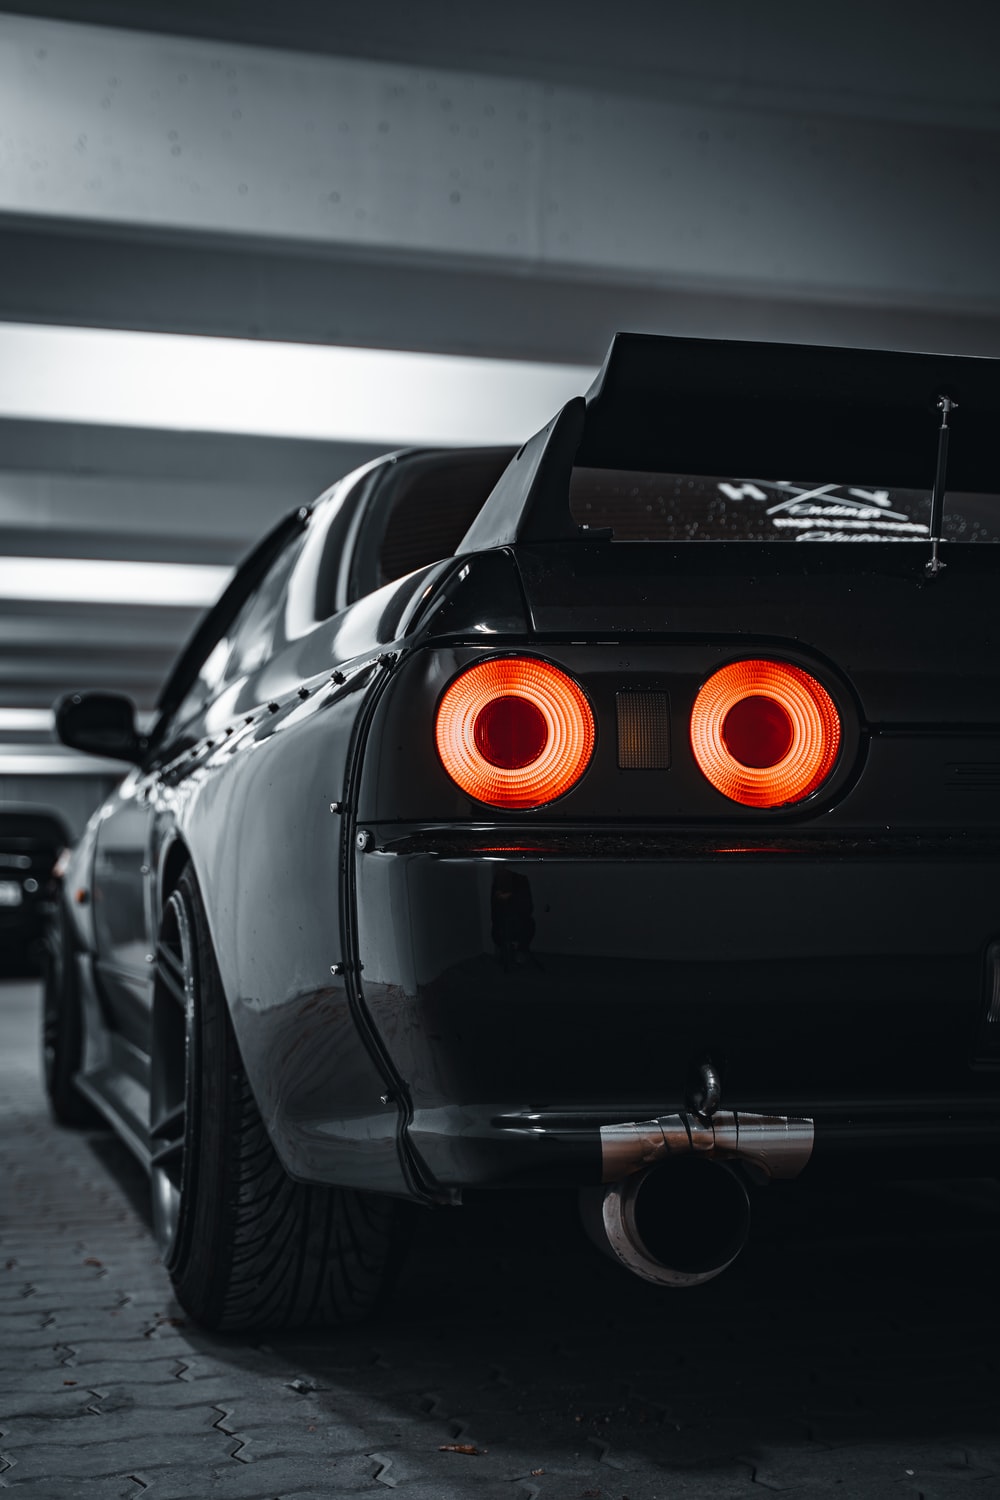 Jdm Cars Picture. Download Free Image